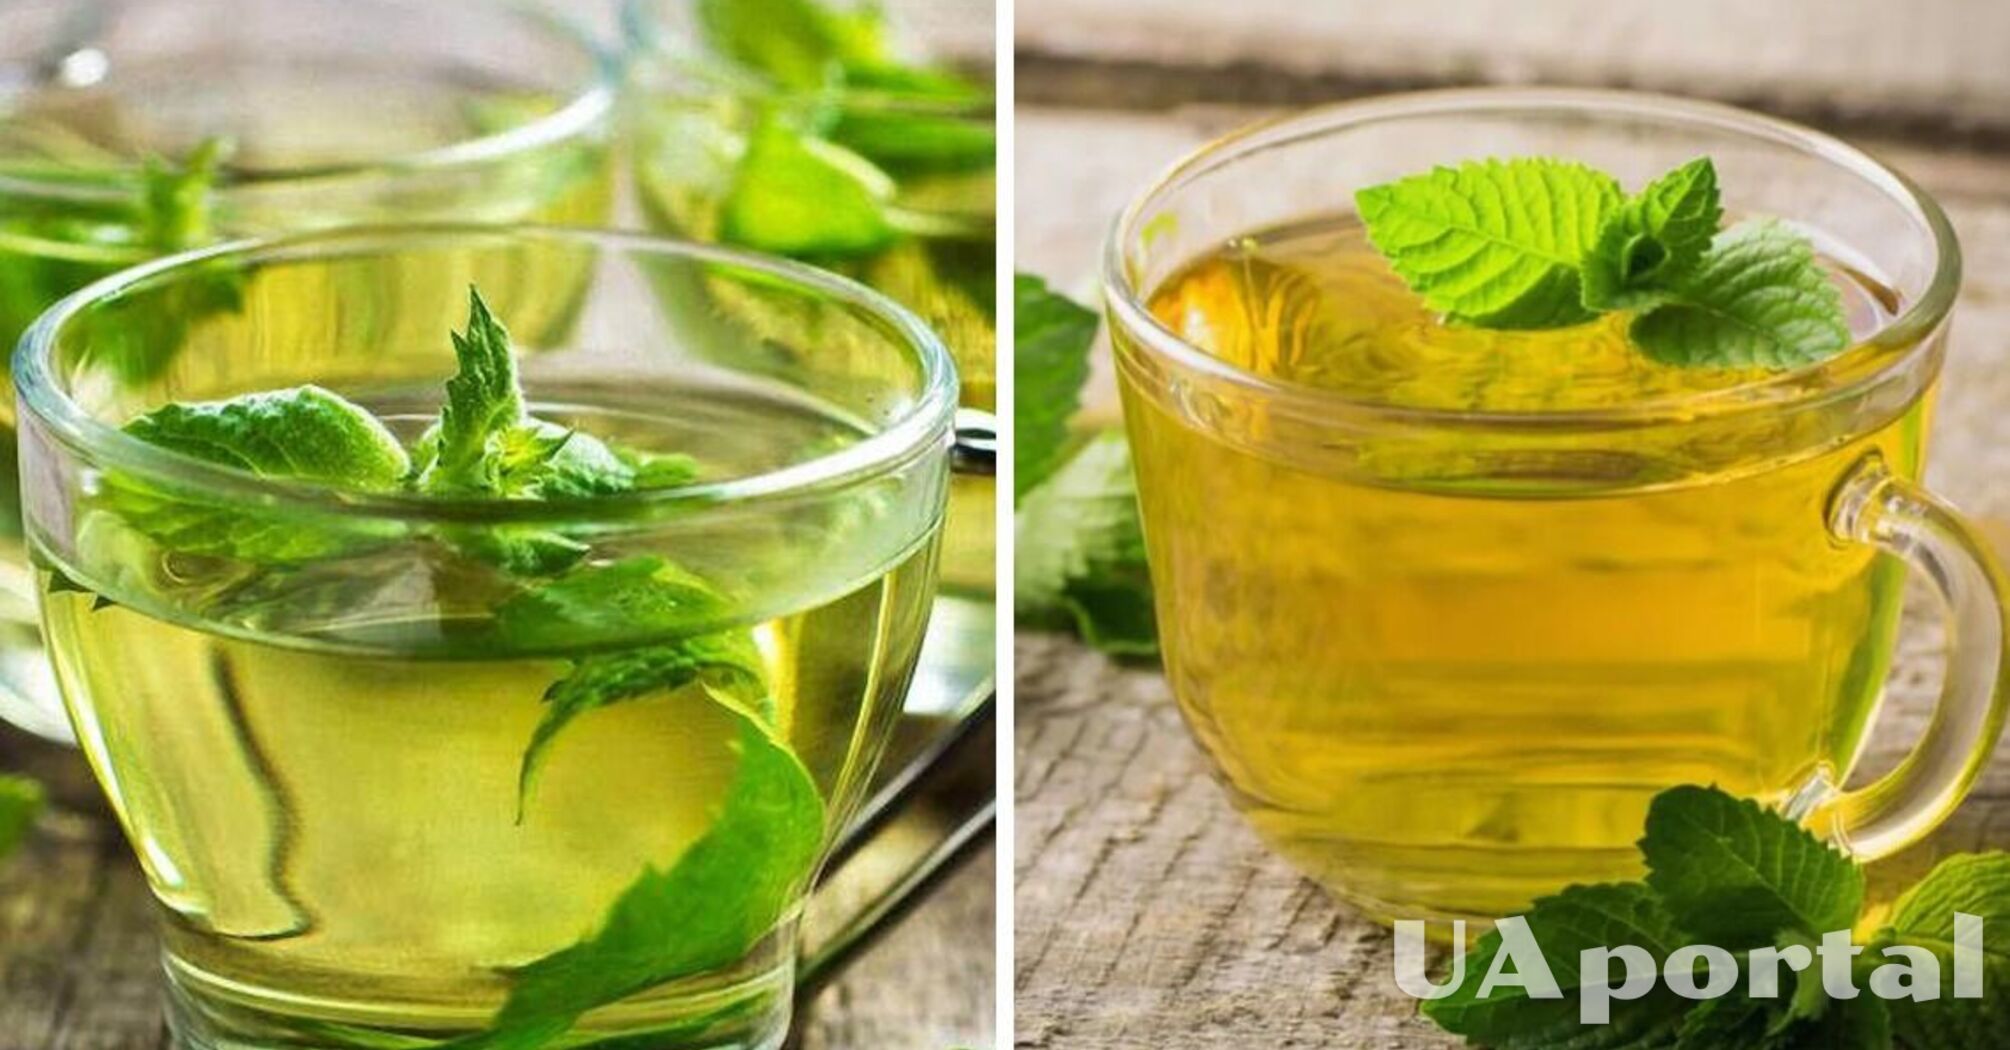 Why mint tea is good for health and immunity